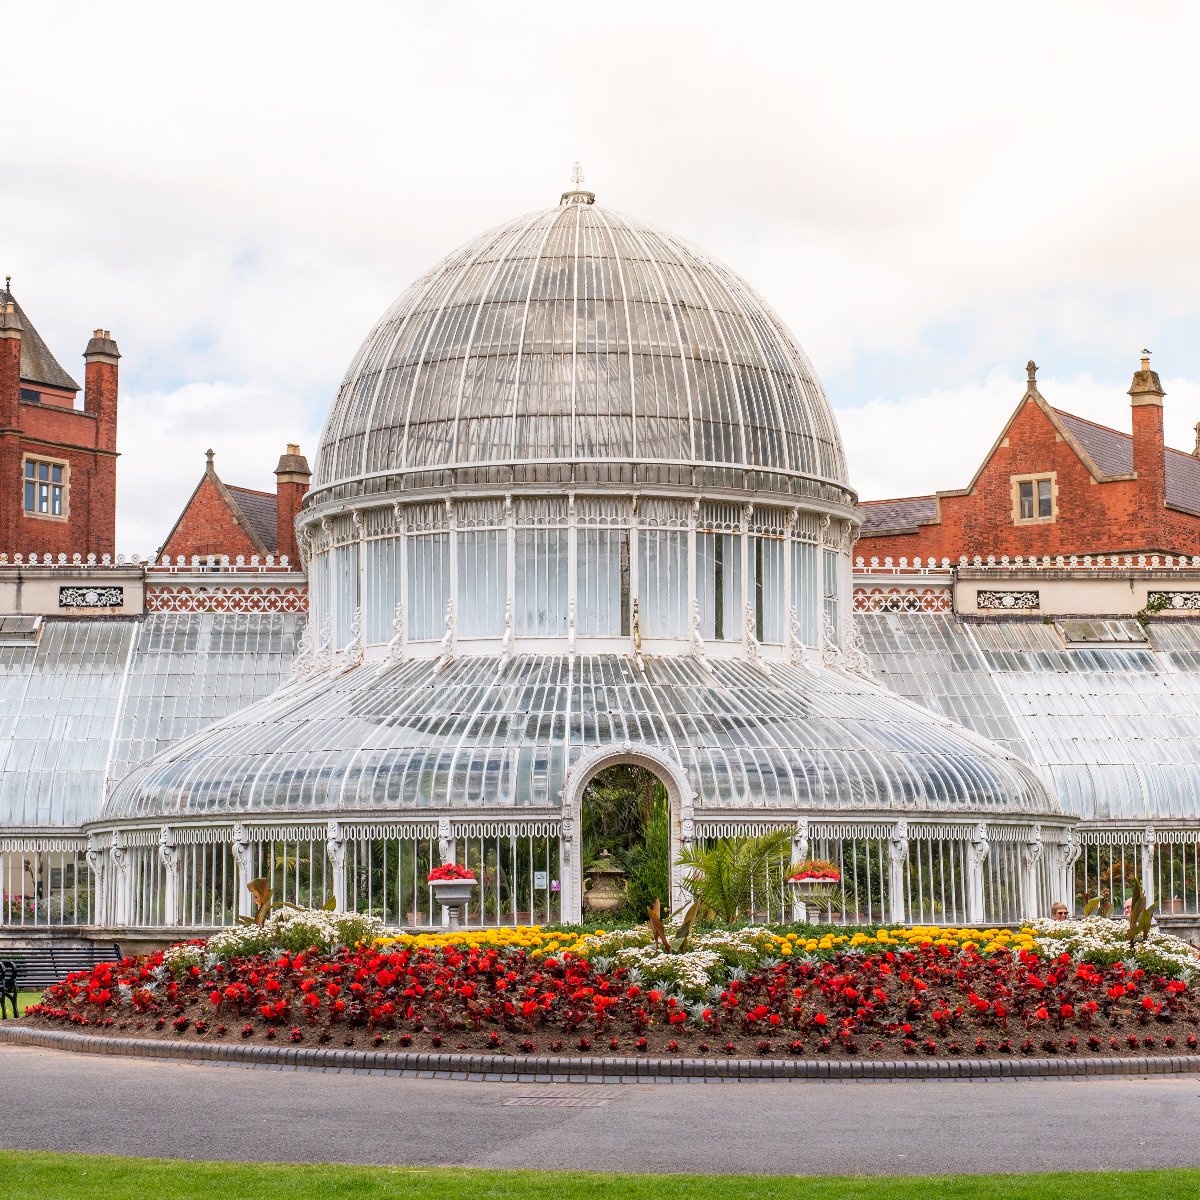 The entrance to the Palm House in Belfast's Botanic Gardens